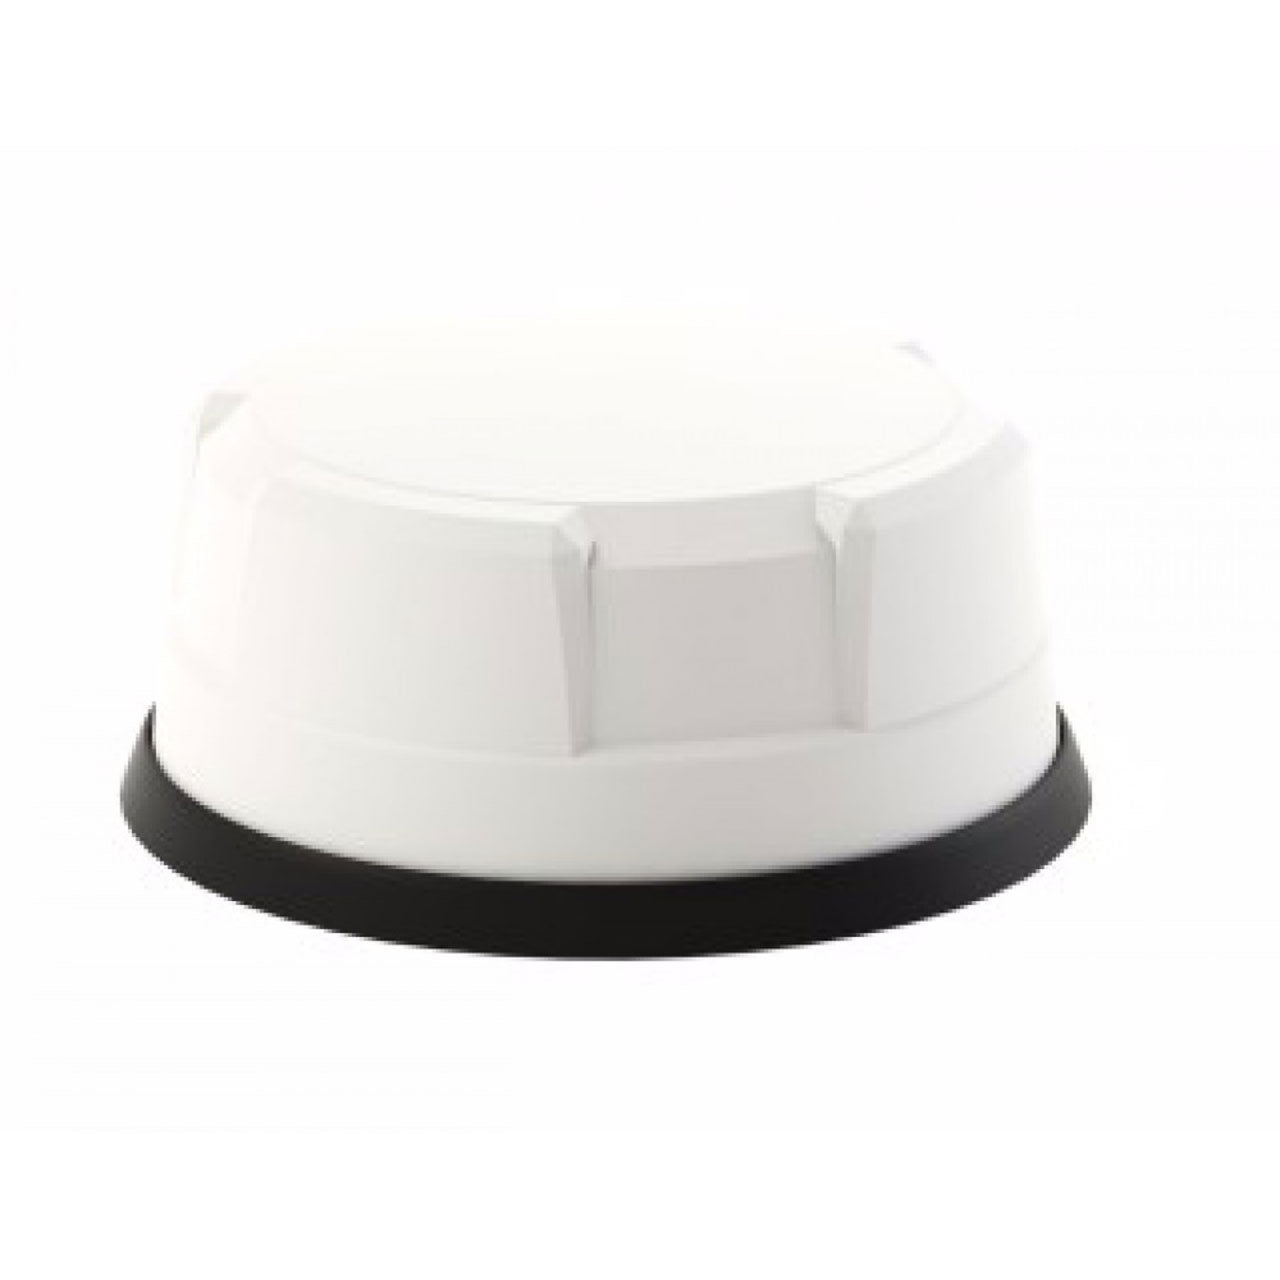 Sierra Wireless Airlink 9-in-1 Dome Antenna, 4x5G/LTE, GNSS, 4xWi-Fi 2.4/5GHz, Bolt Mount, 5m, Fakra -6001399/600140